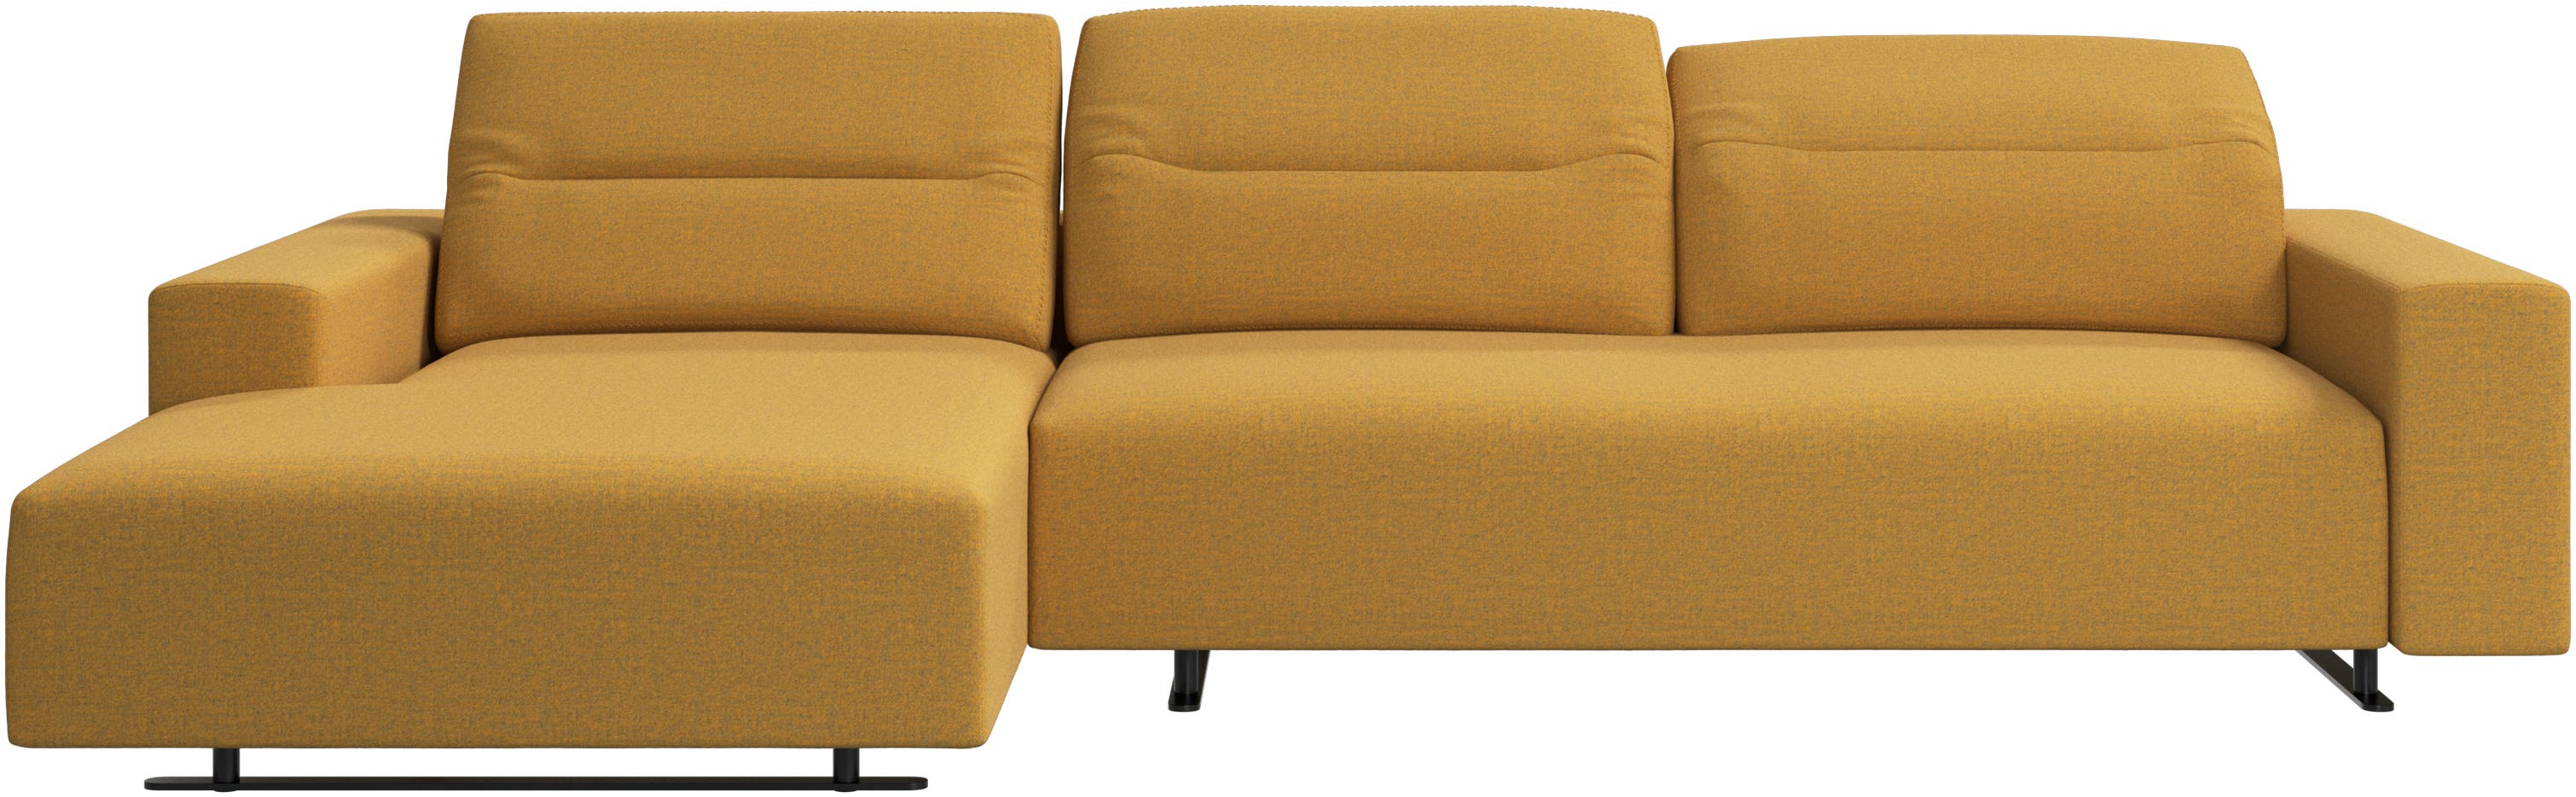 Hampton sofa with adjustable back and resting unit left side